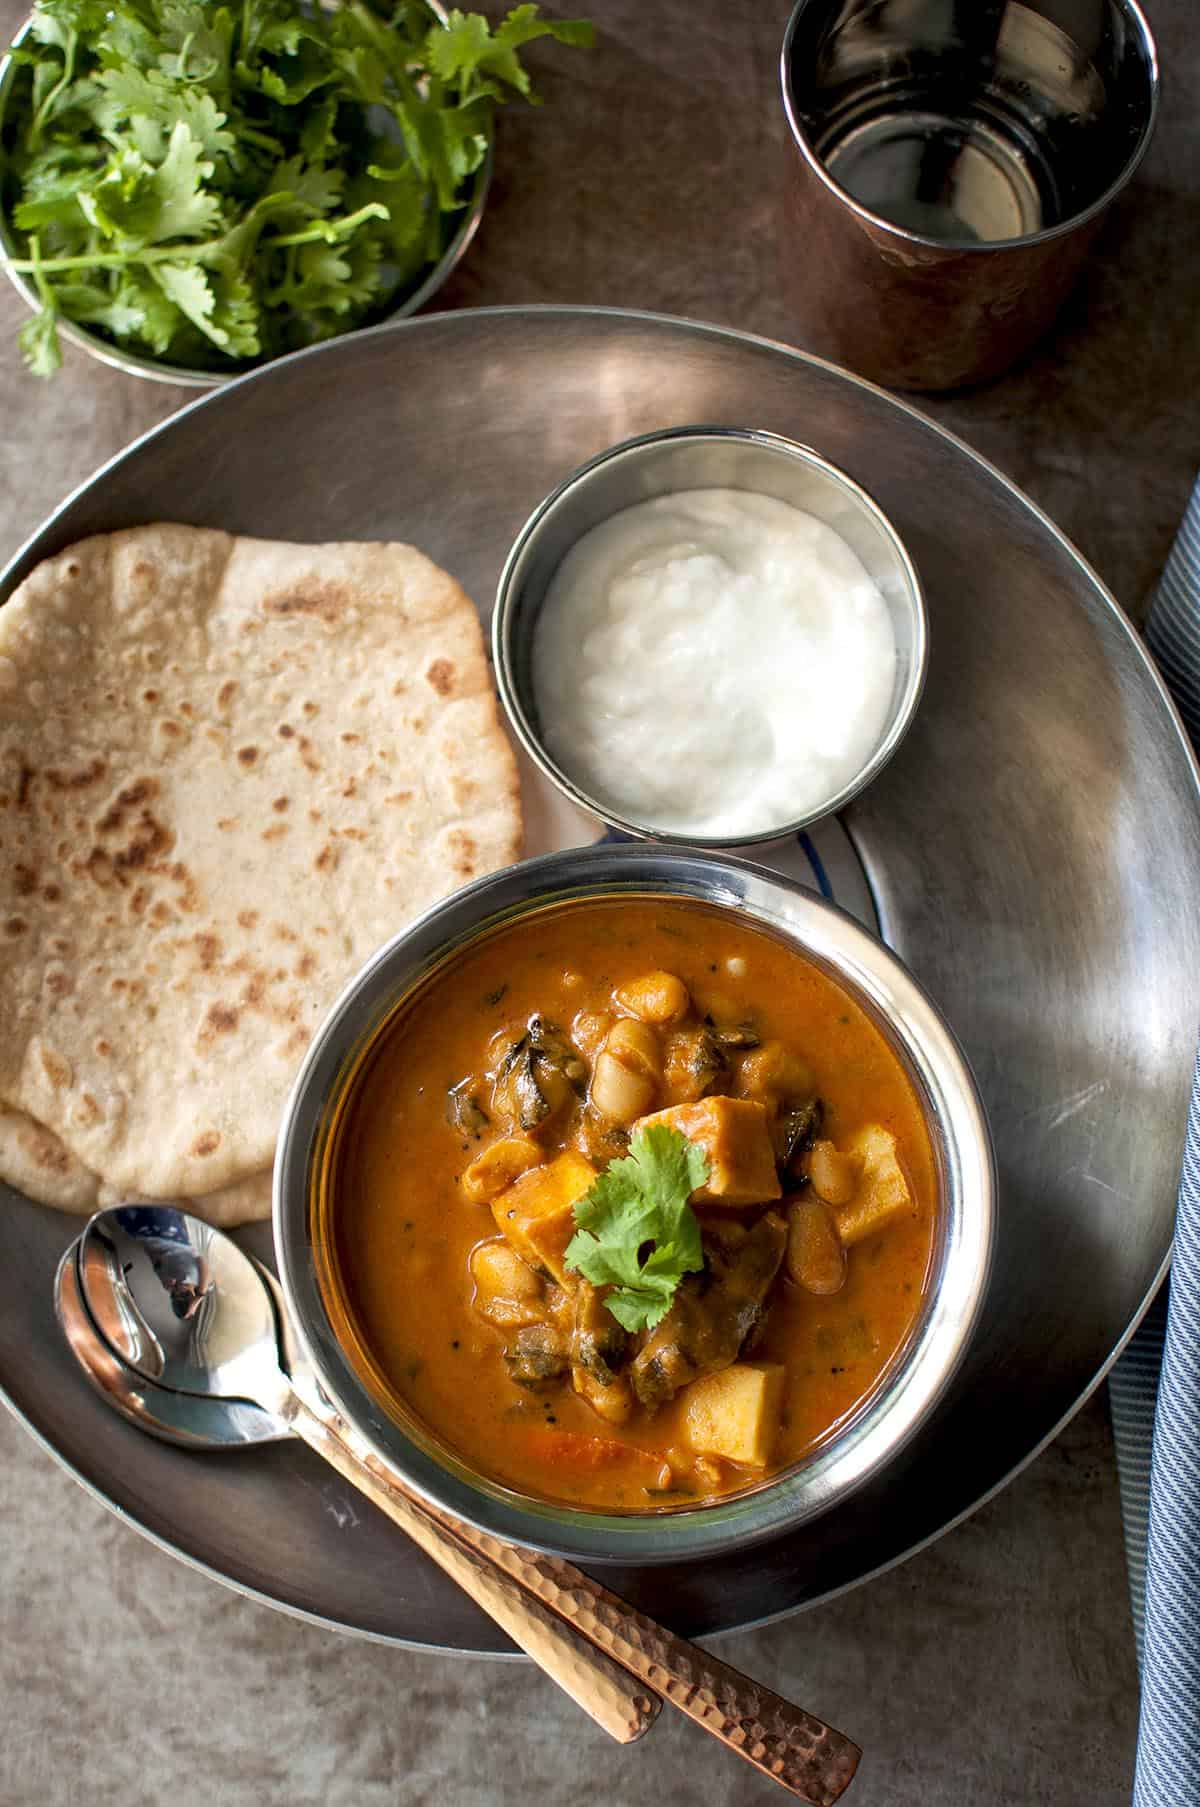 Tray with steel bowl of paneer curry, flatbread and a bowl of yogurt